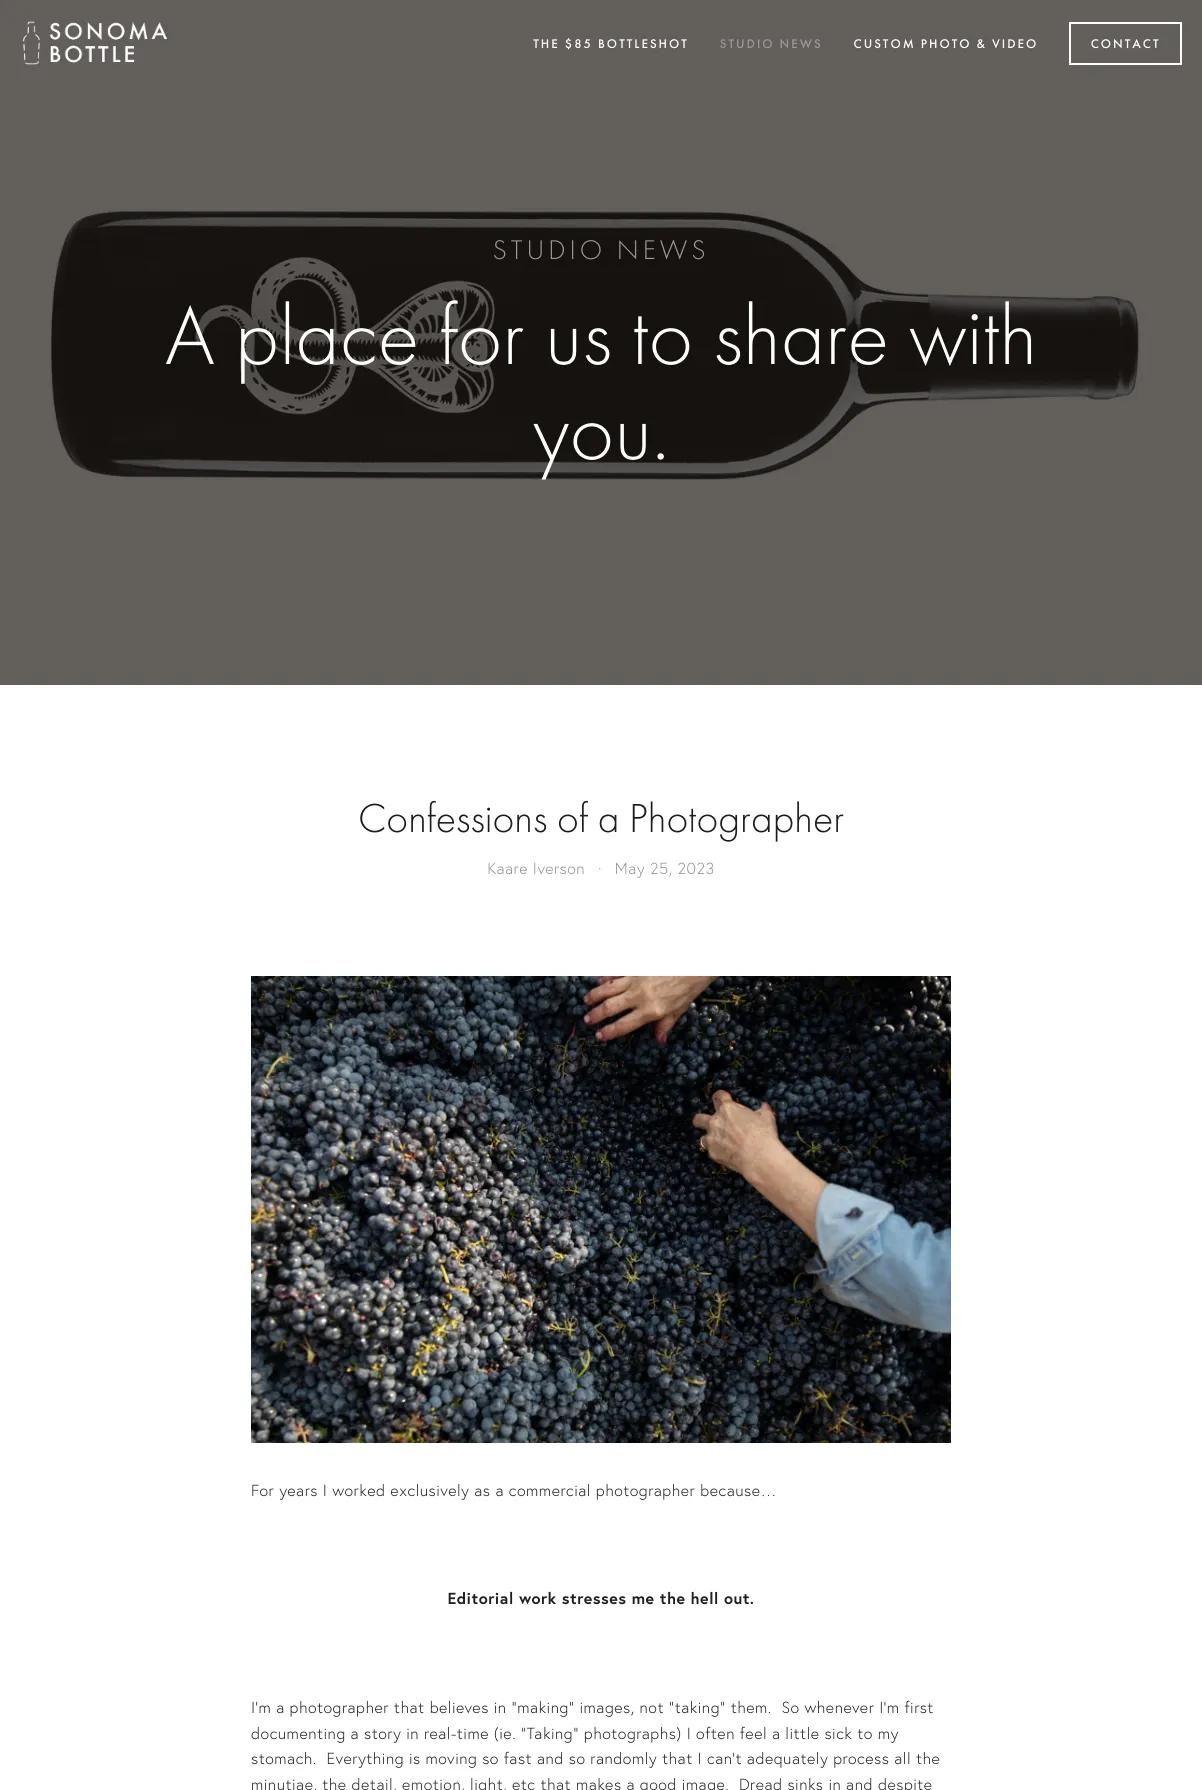 Screenshot 2 of Sonoma Bottle (Example Squarespace Photography Website)